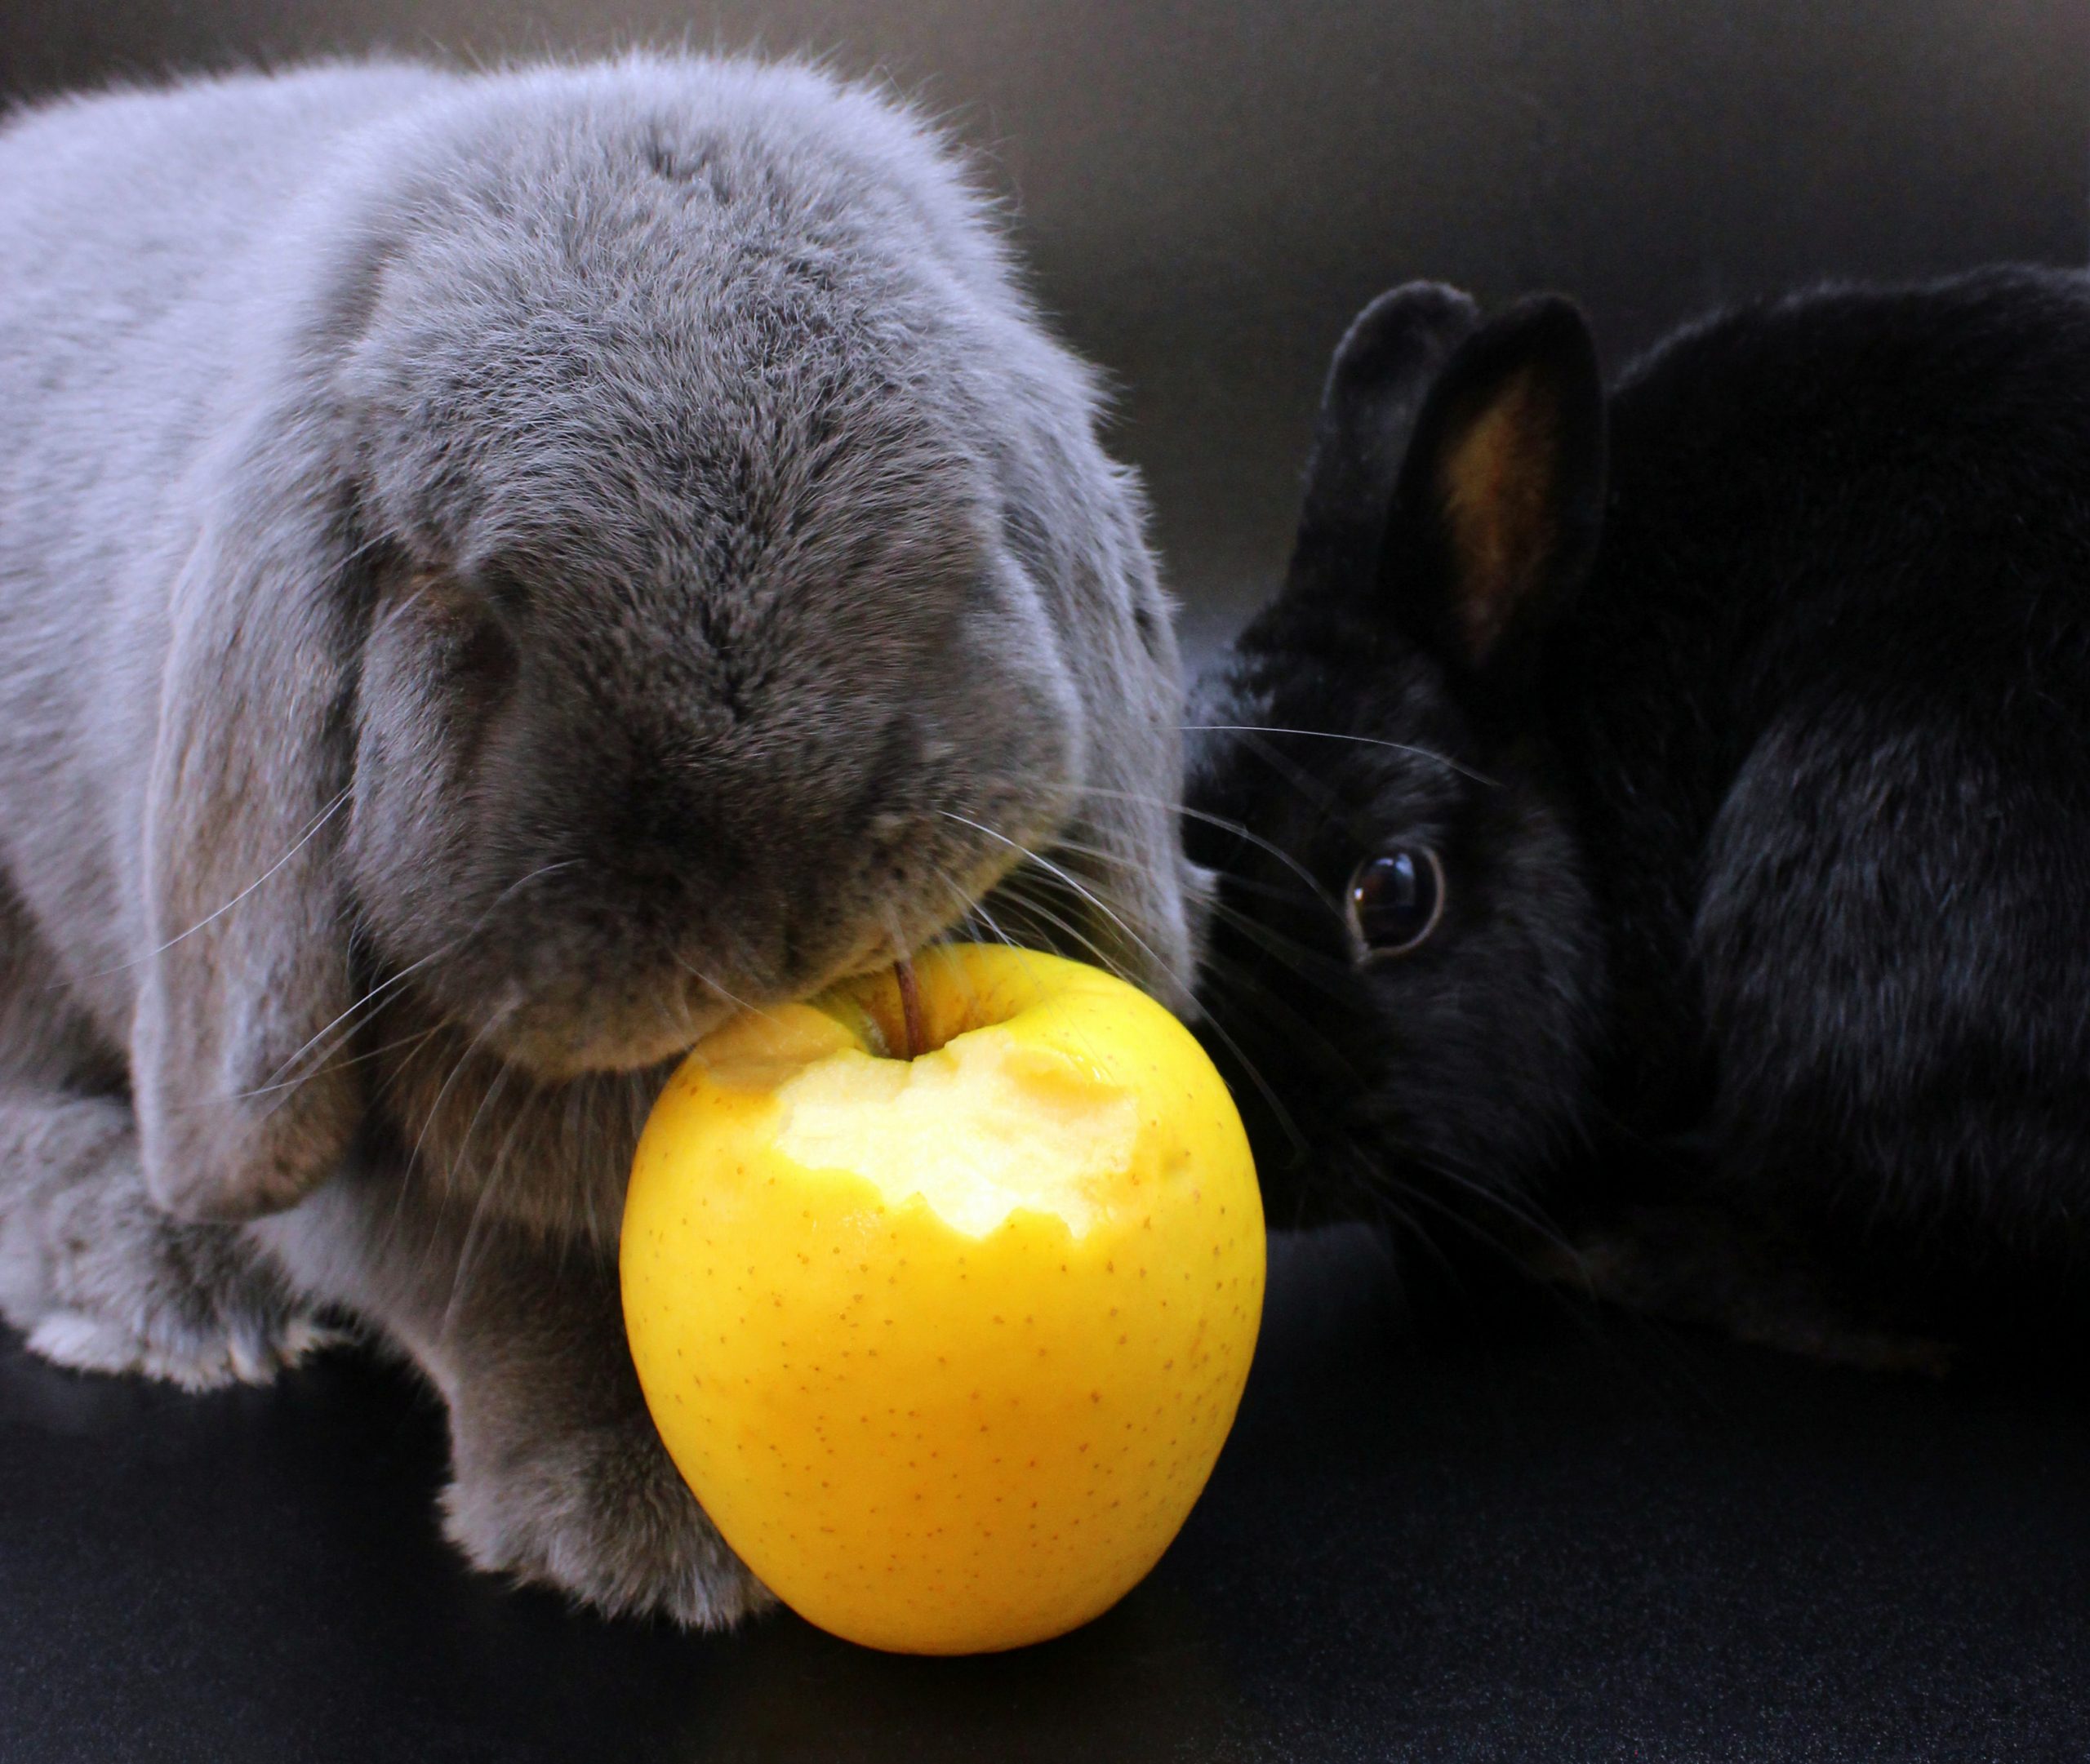 Two bunnies eating an apple